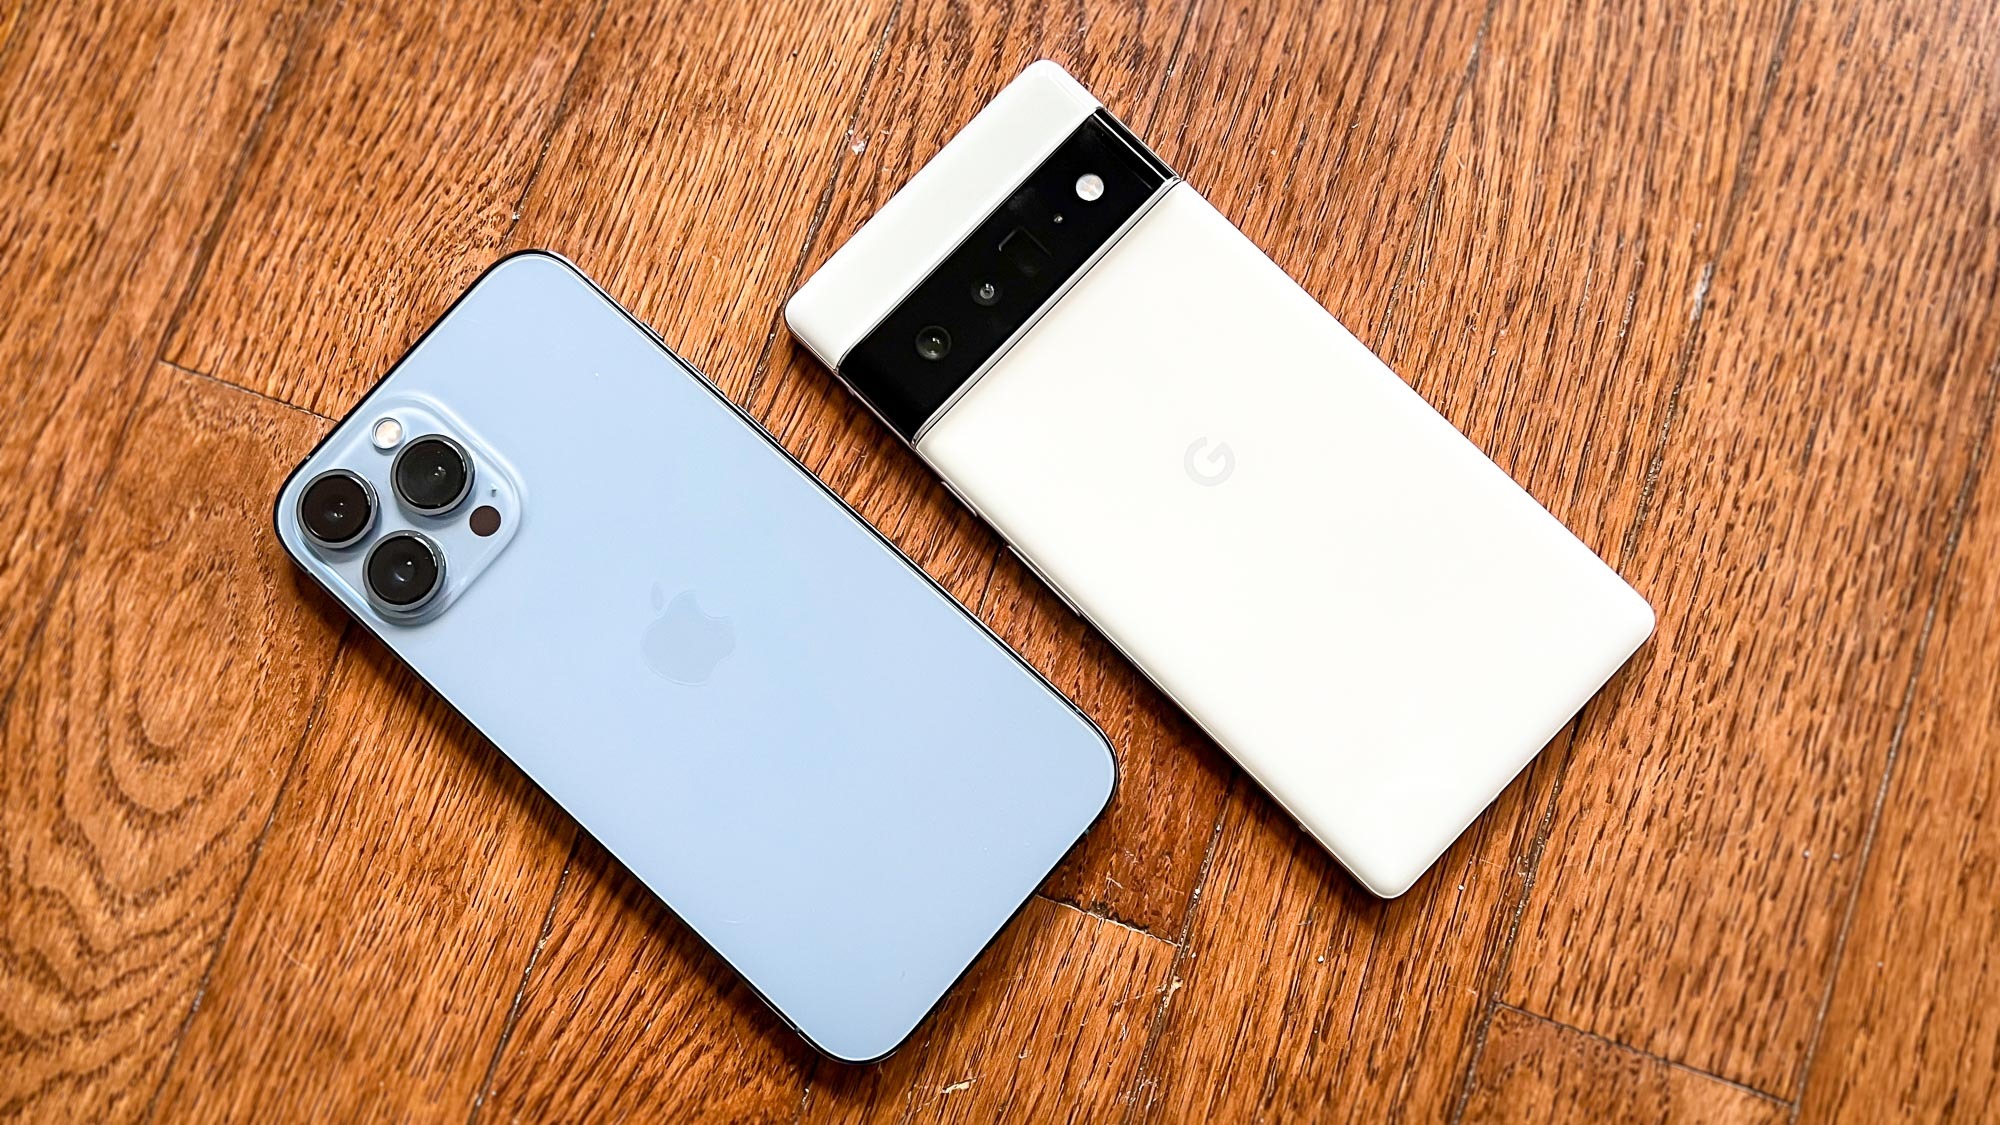 Should I stay with Android or switch to iPhone?